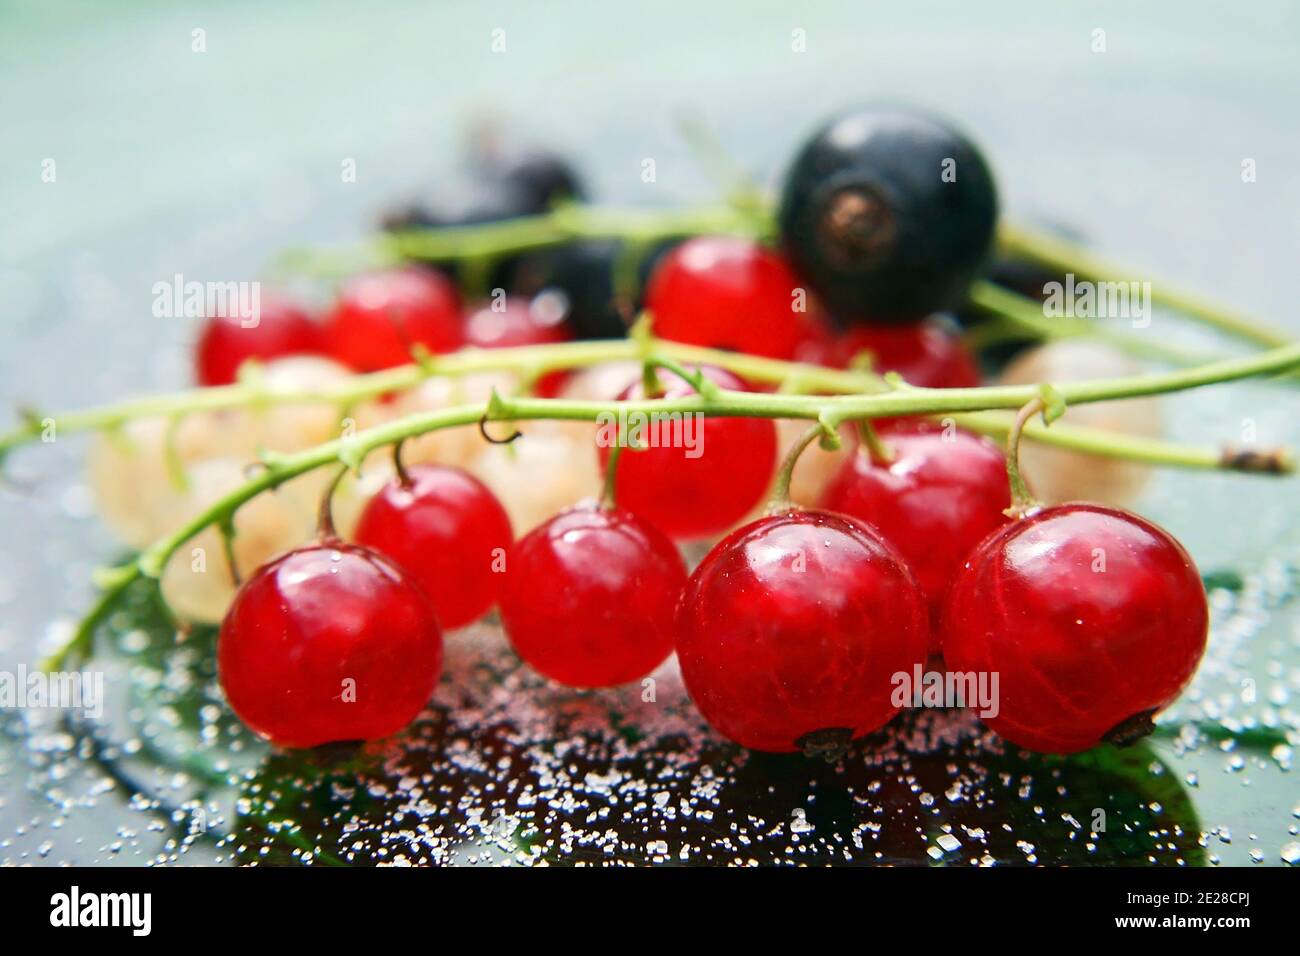 Fresh red, white and black currants Stock Photo